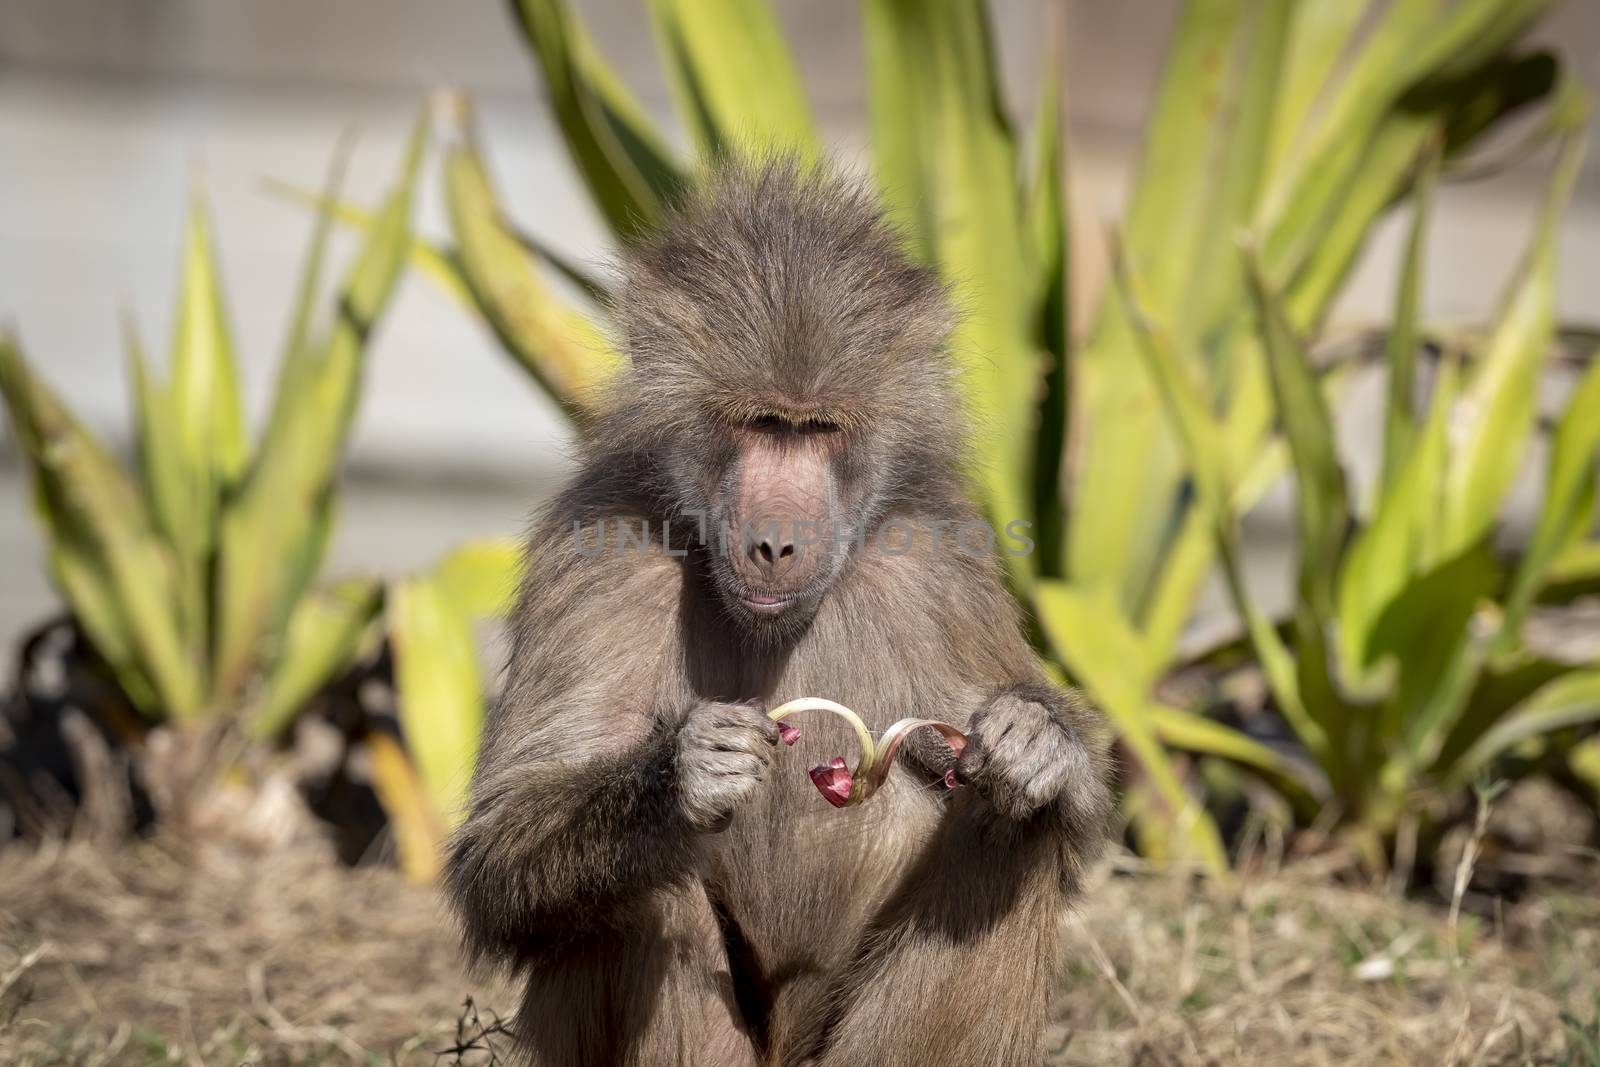 An adolescent Hamadryas Baboon eating food in the outdoors